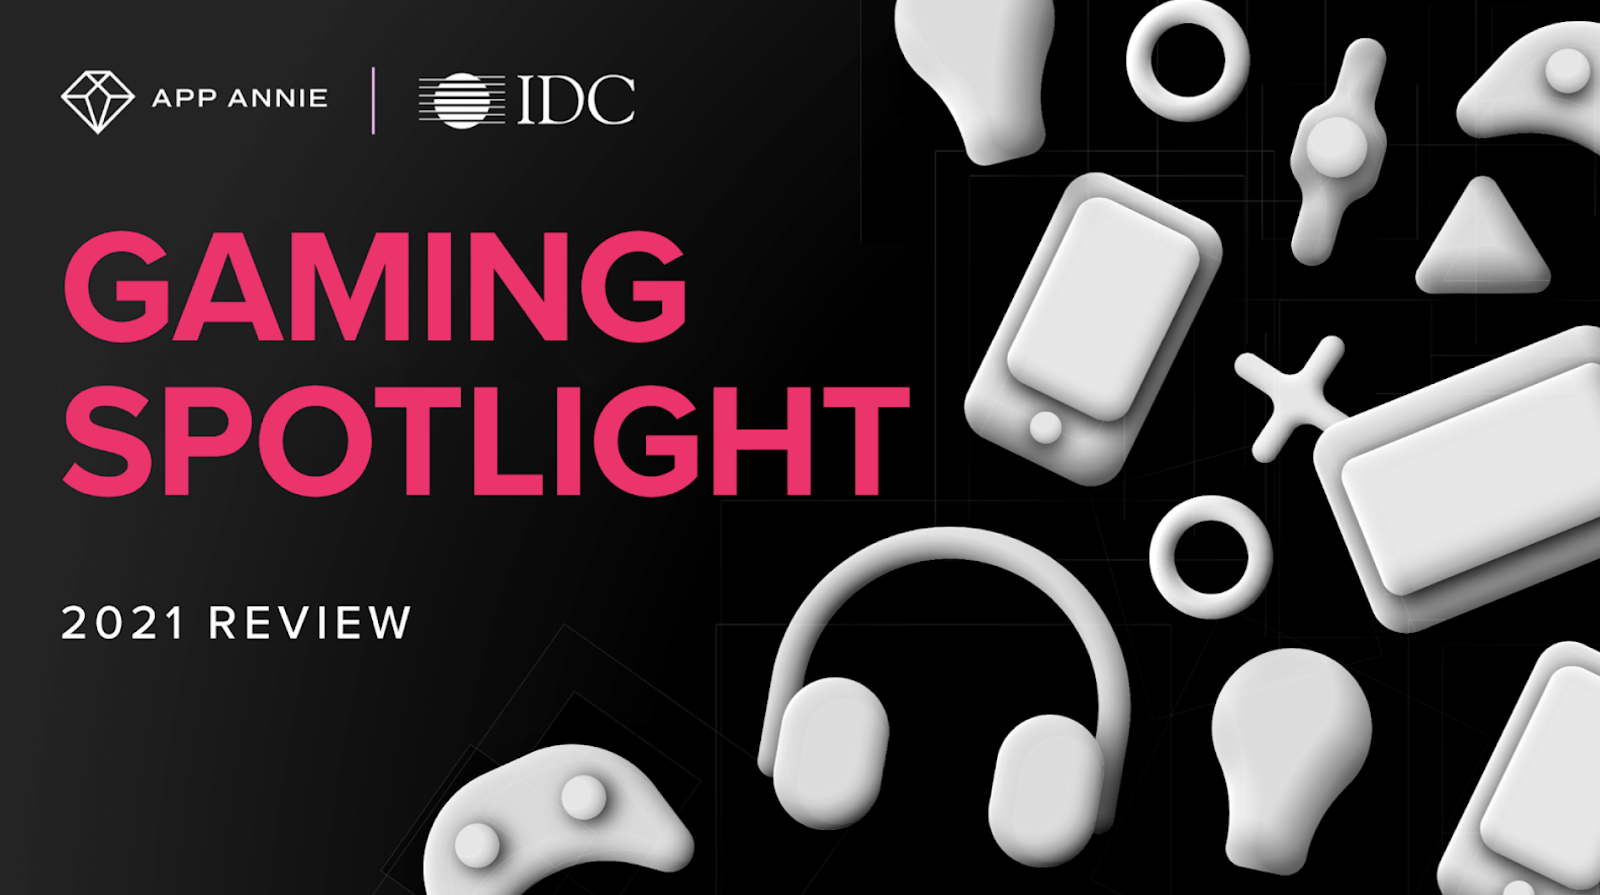 Gaming Spotlight 2021 Report with IDC